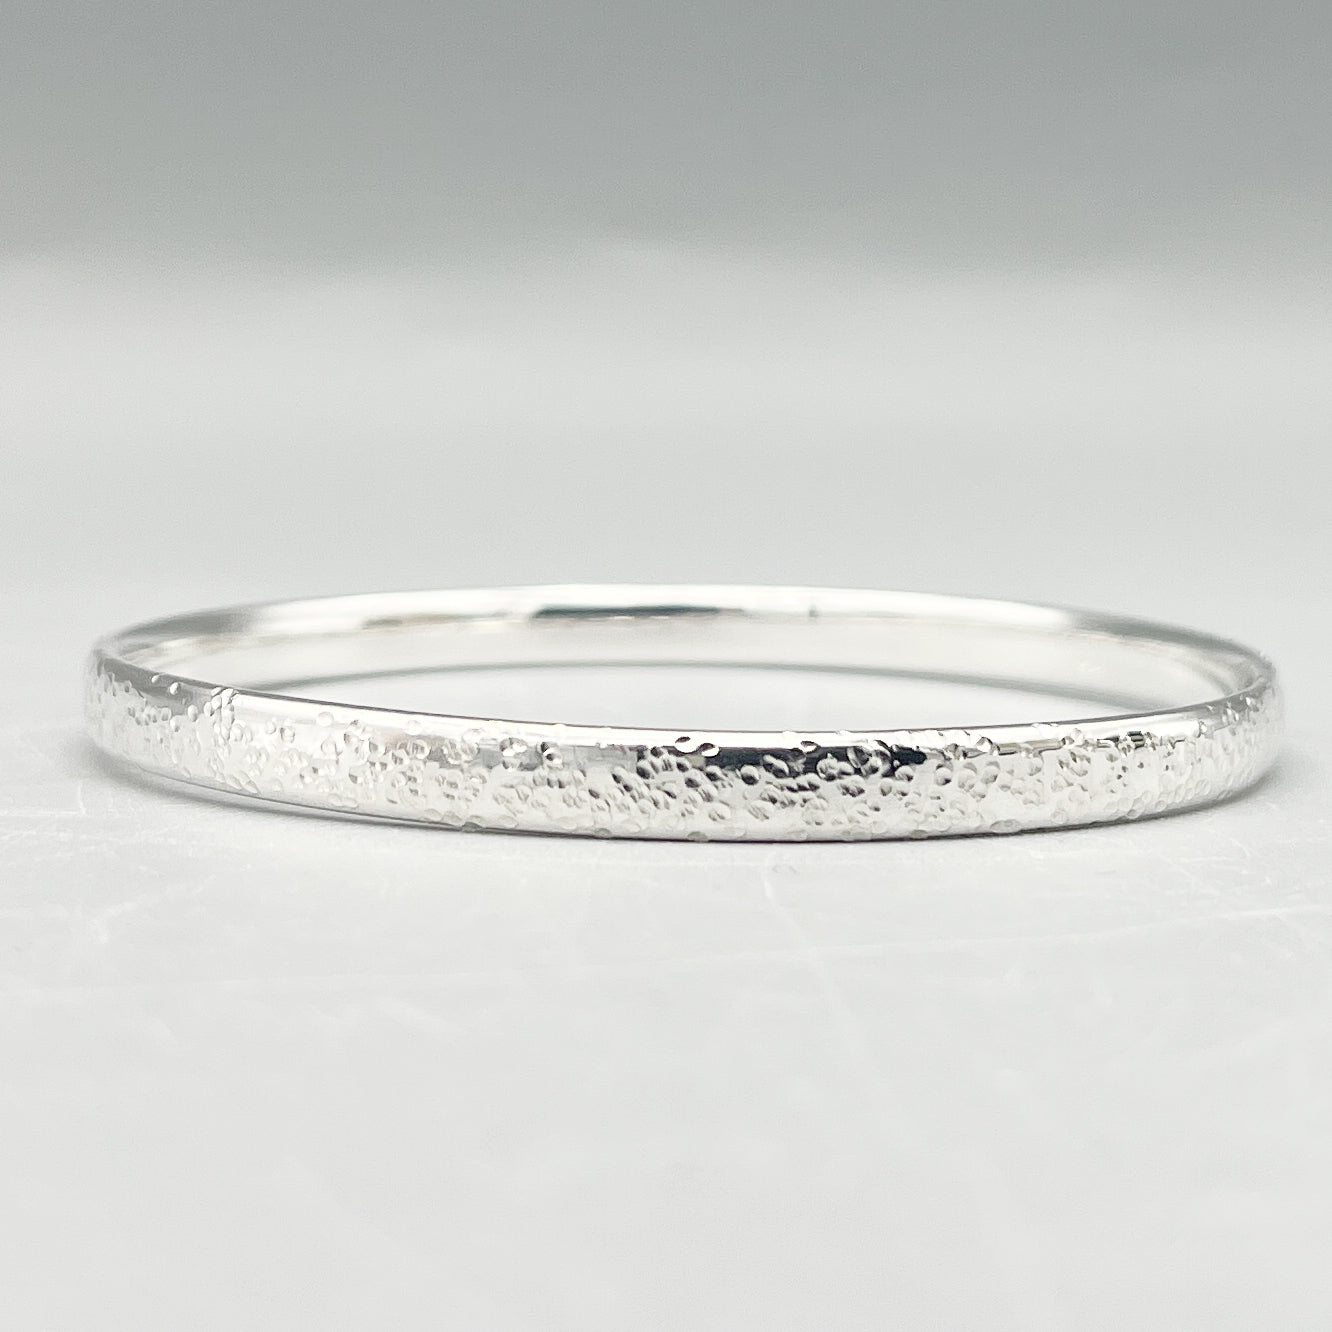 Sterling Silver Bangle. 'Star hammered' finish 70mm x 5.4mm x 2.3mm